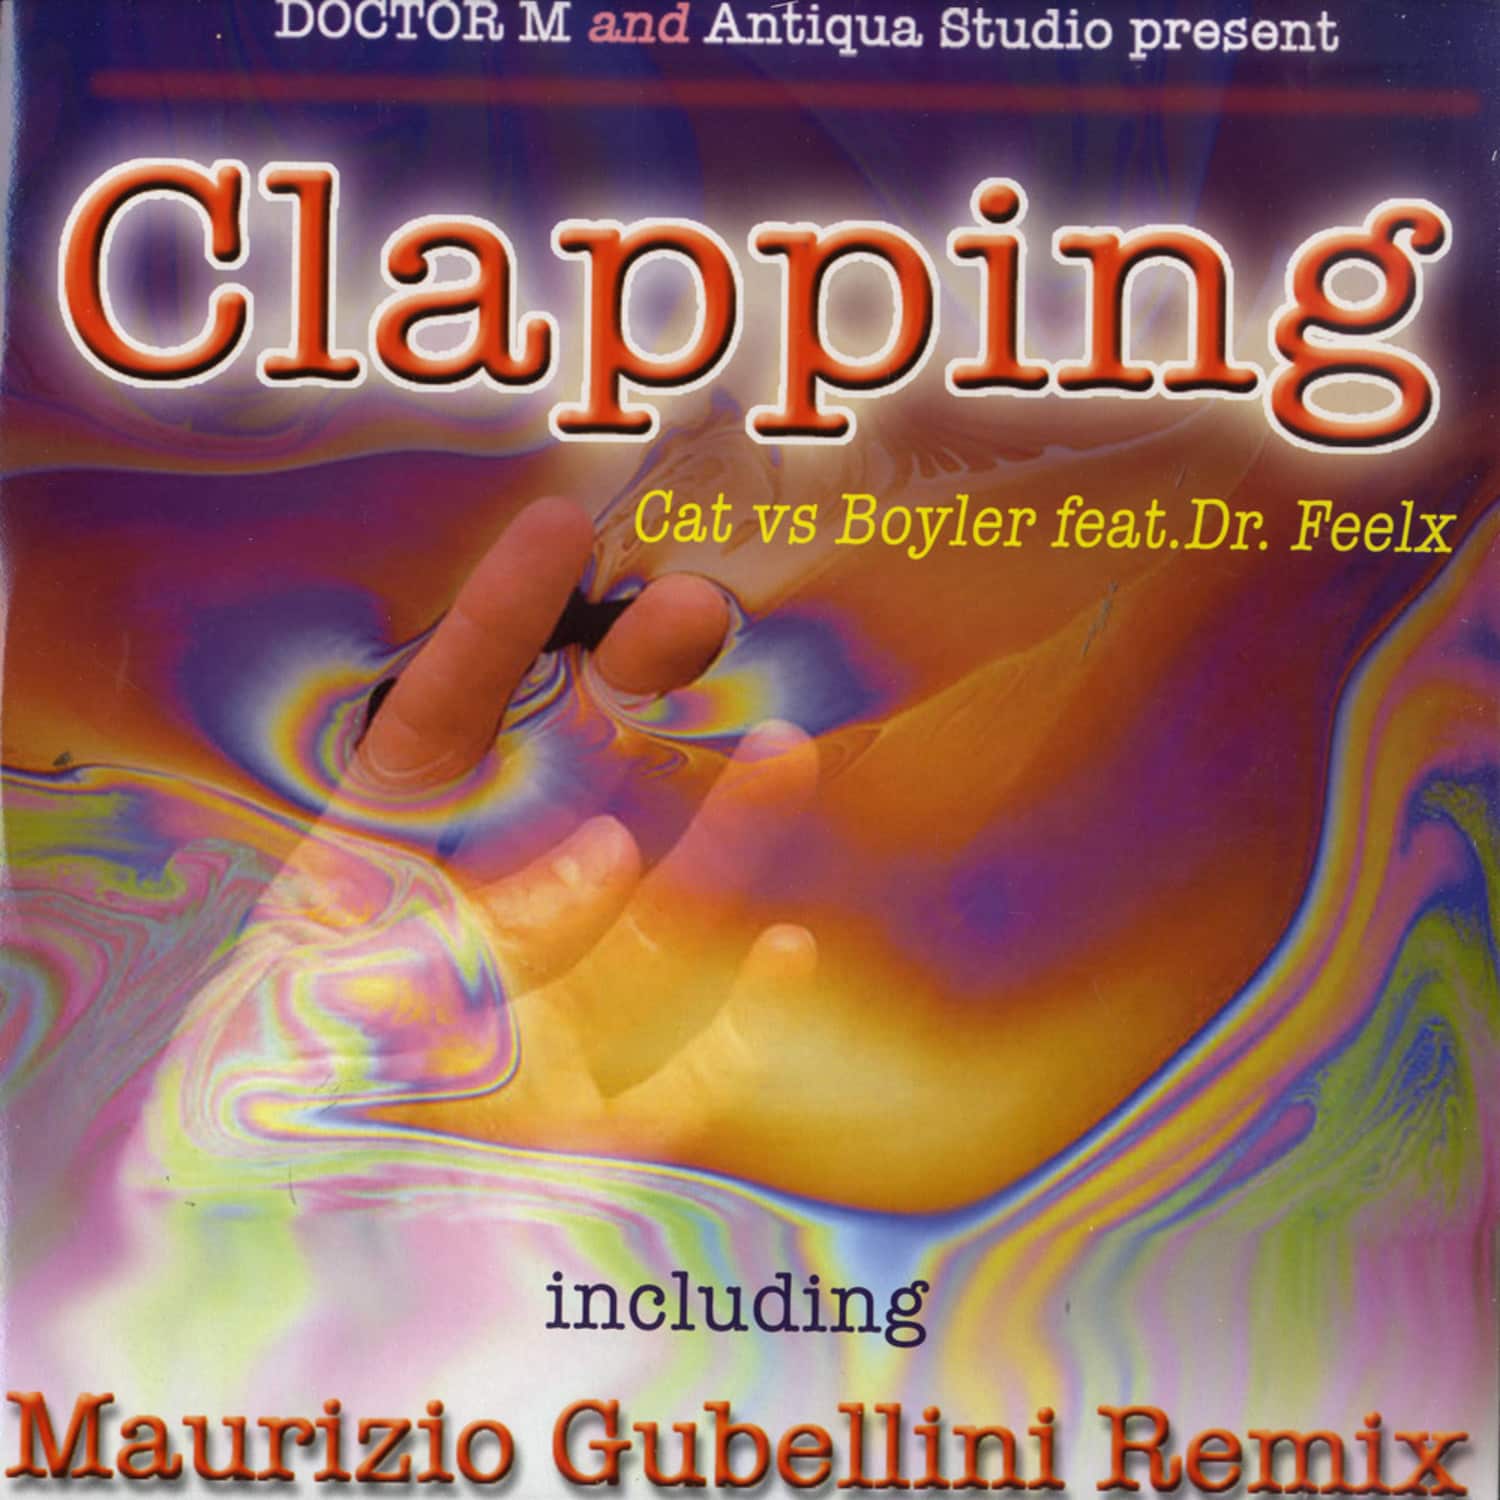 Cat Vs. Boyler Feat. Dr. Feelx - CLAPPING